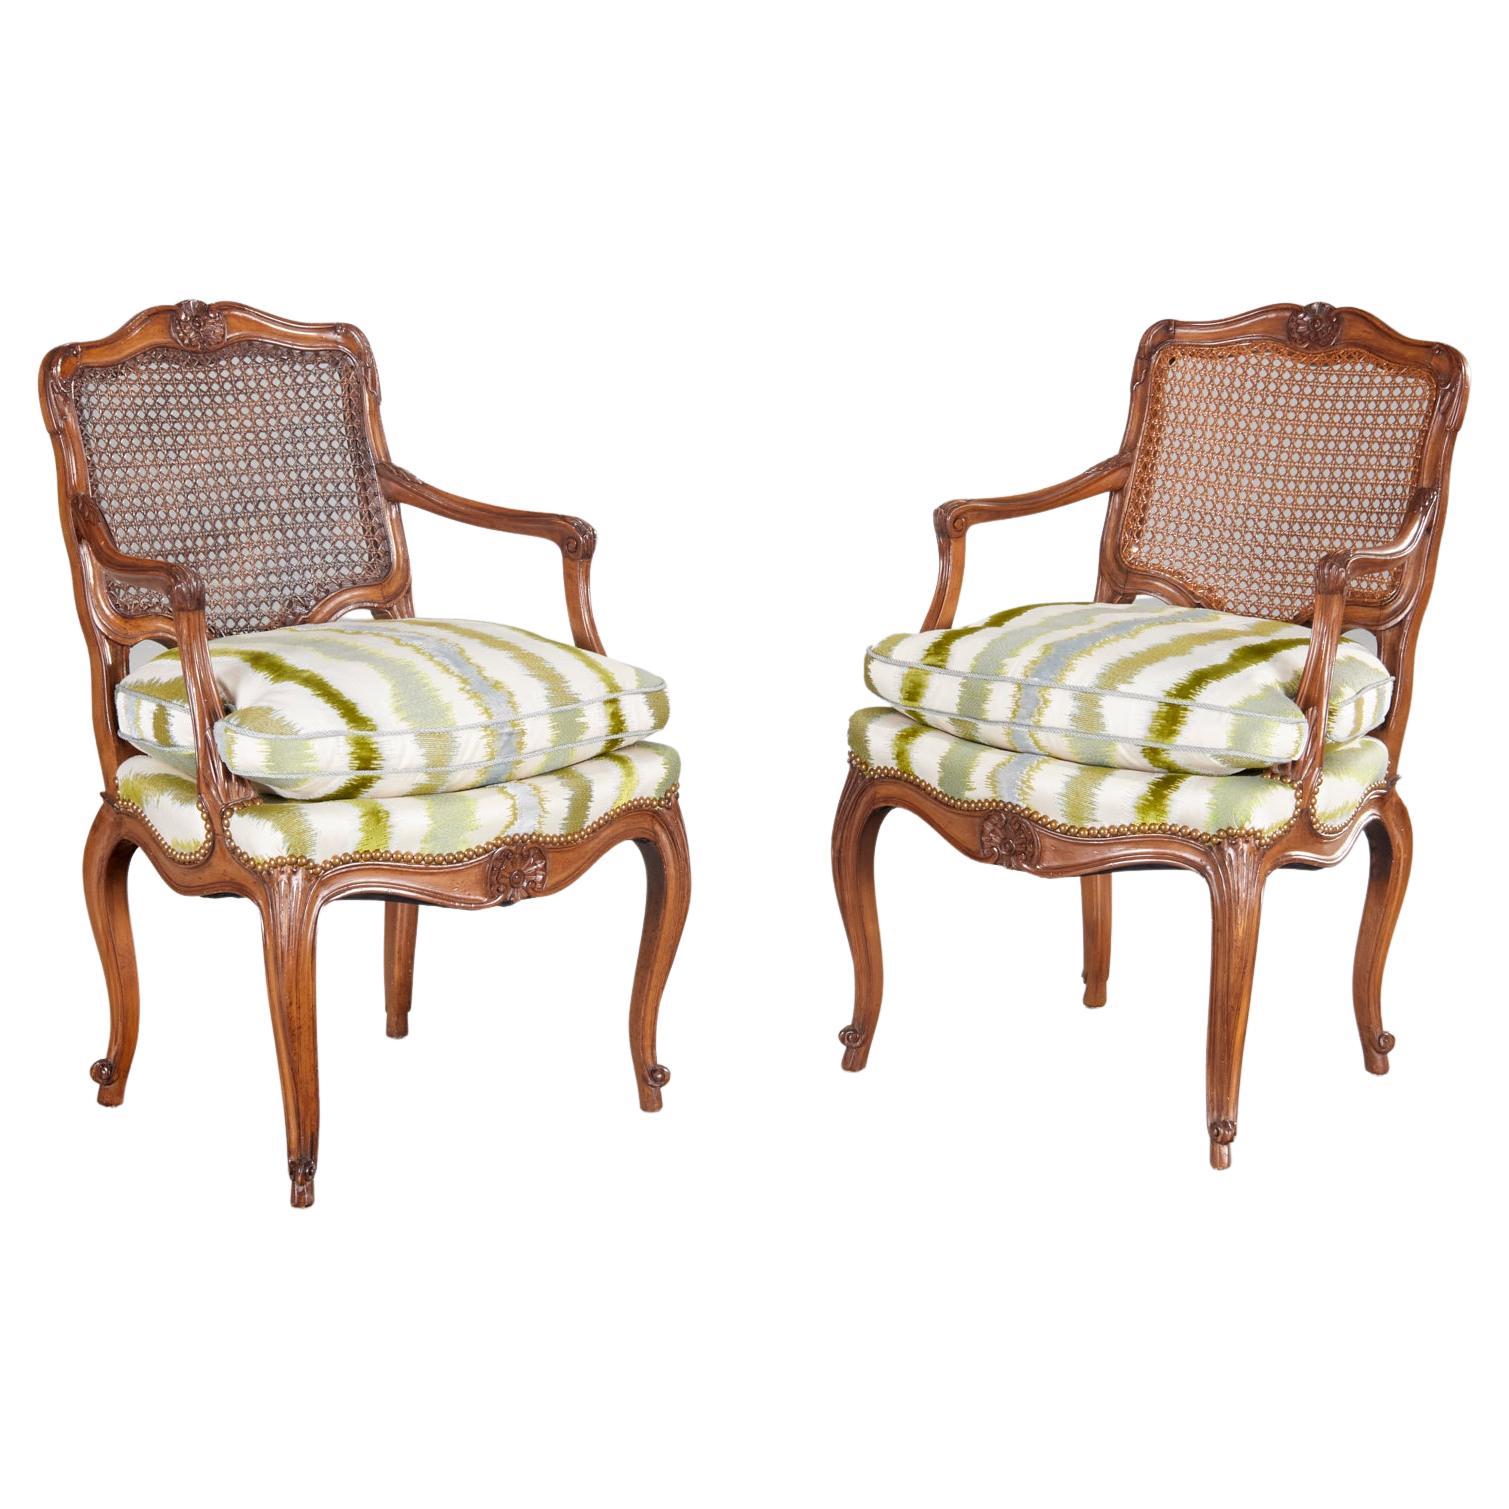 Vintage Pair Louis XV Style Caned Back Beechwood Fauteuils with Embroidered Silk